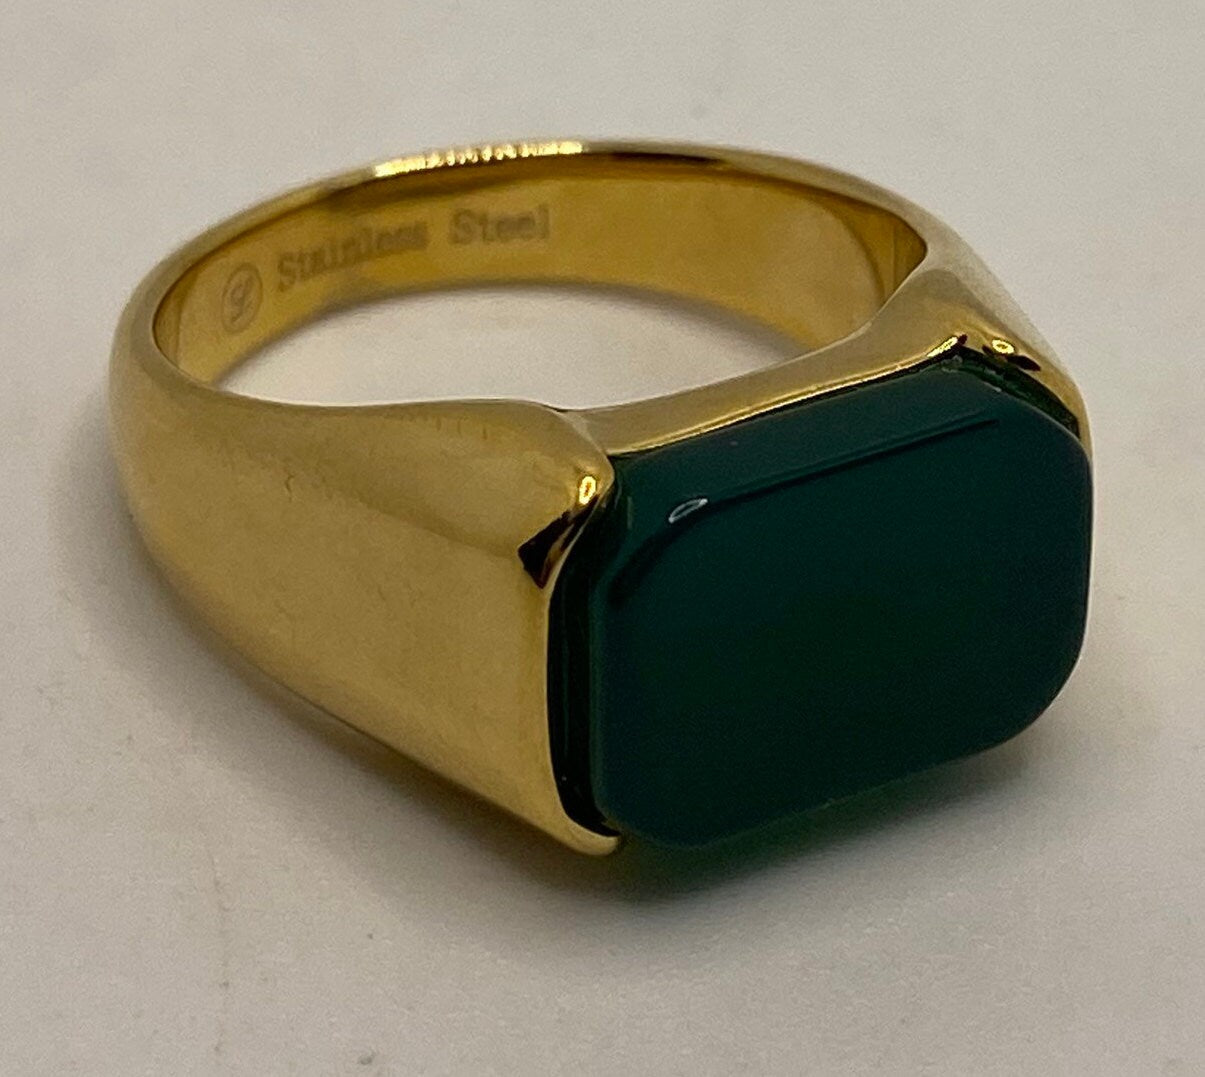 Vintage Green Onyx Gold Finished Mens Ring